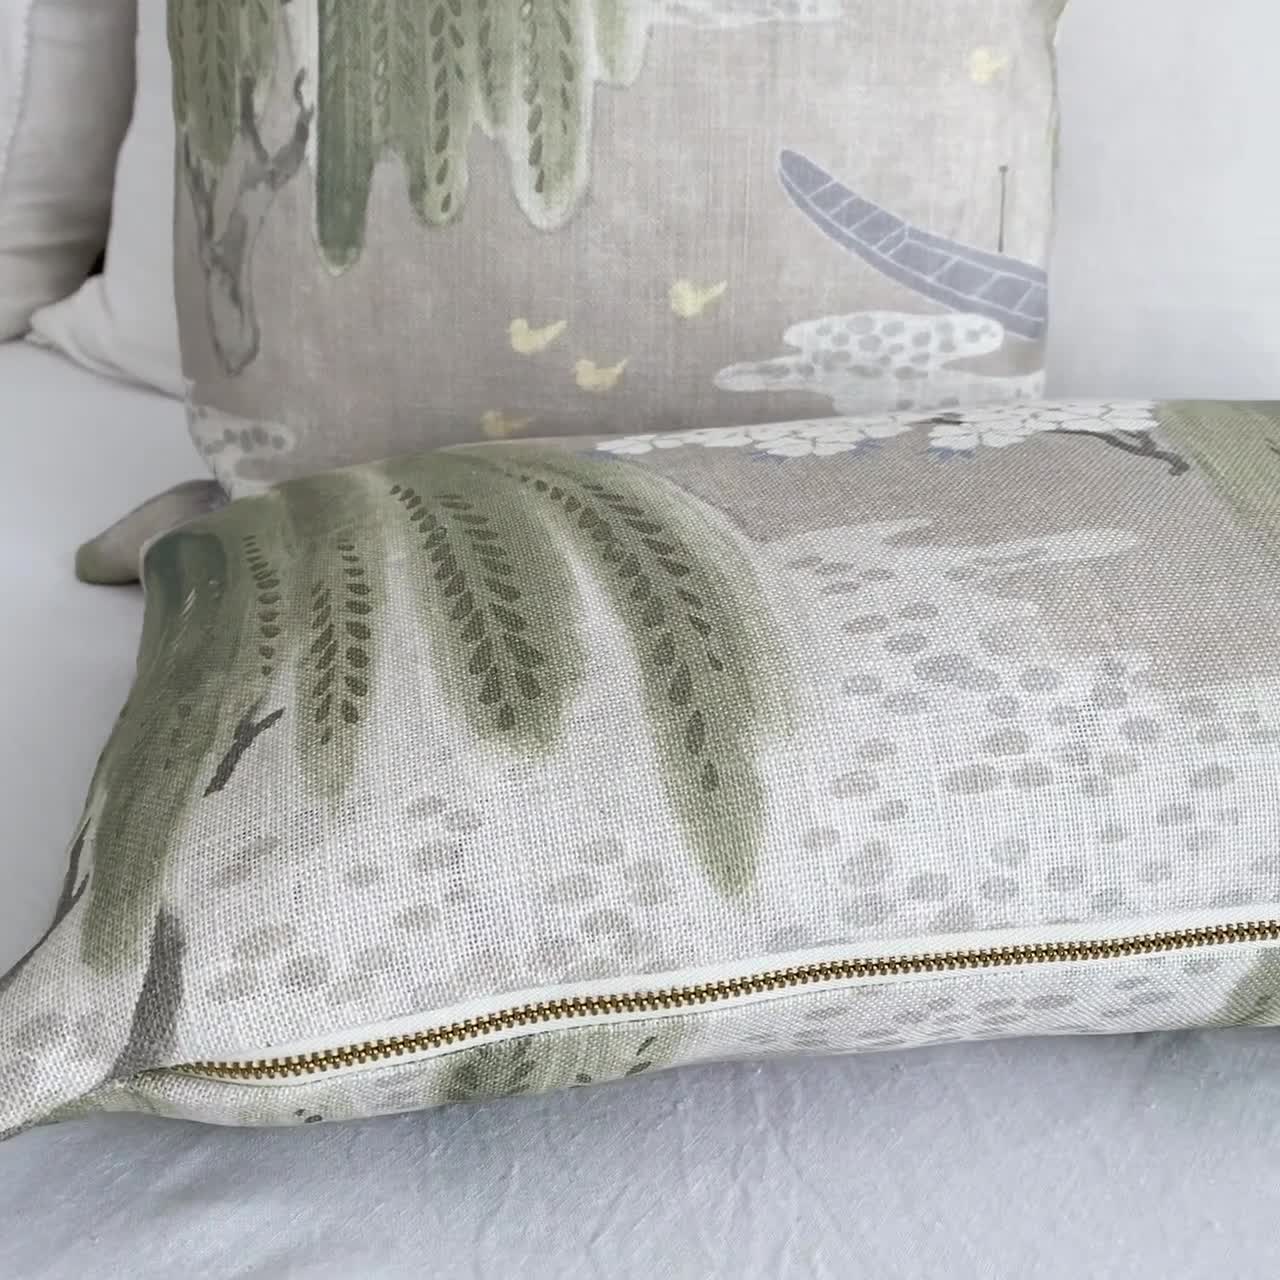 https://v.etsystatic.com/video/upload/q_auto/Thibaut-Willow-Tree-AF23106-Beige-Chinoiserie-Printed-Floral-Decorative-Throw-Pillow-Cover-Product-Video_o06tvk.jpg